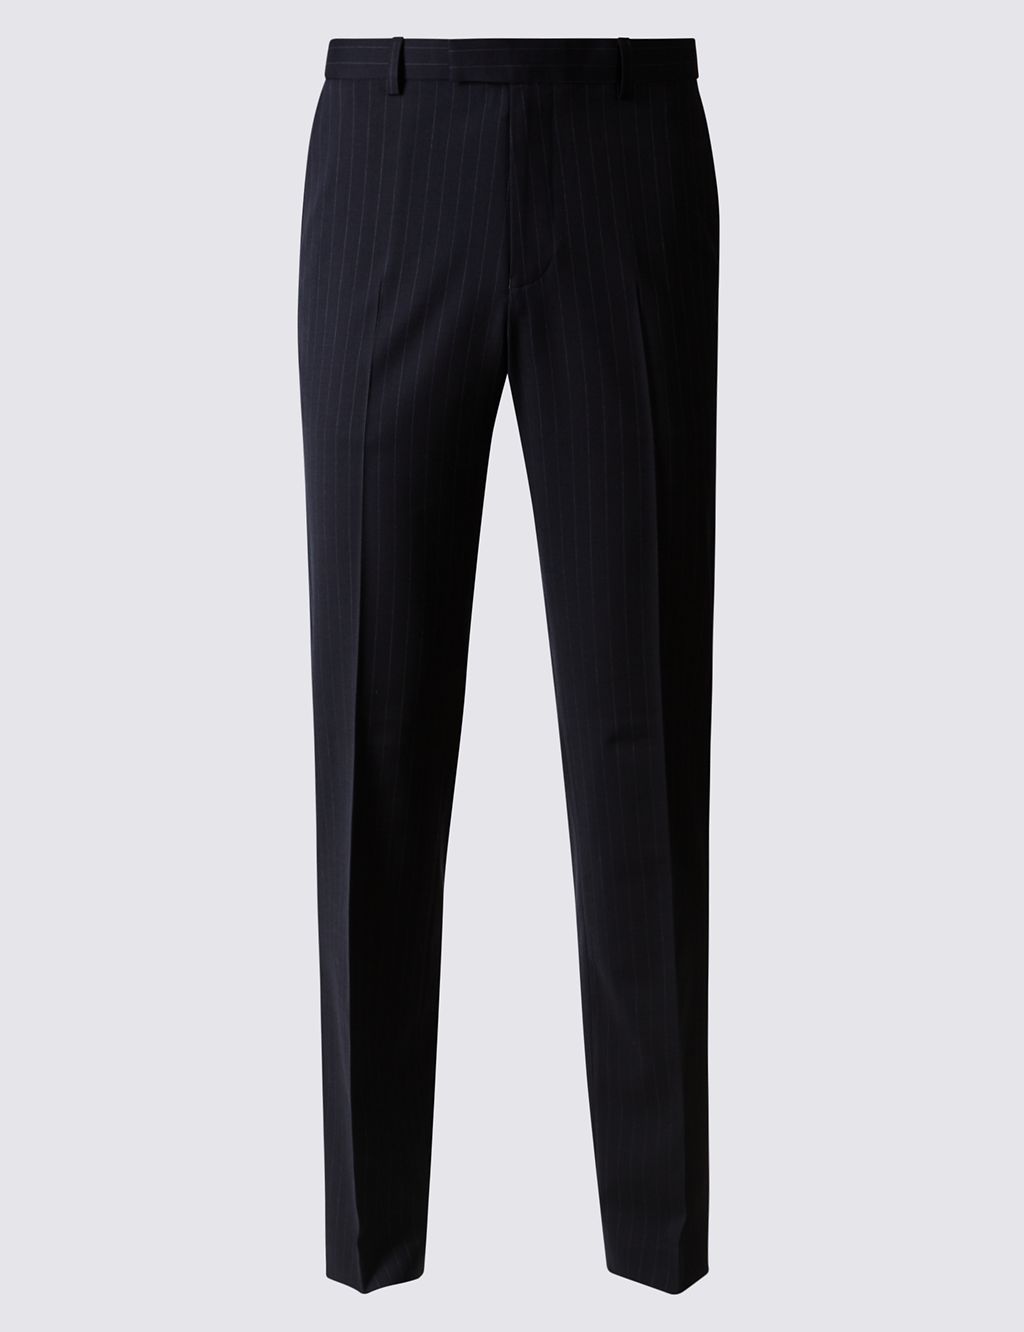 Navy Striped Modern Slim Fit Trousers 1 of 5